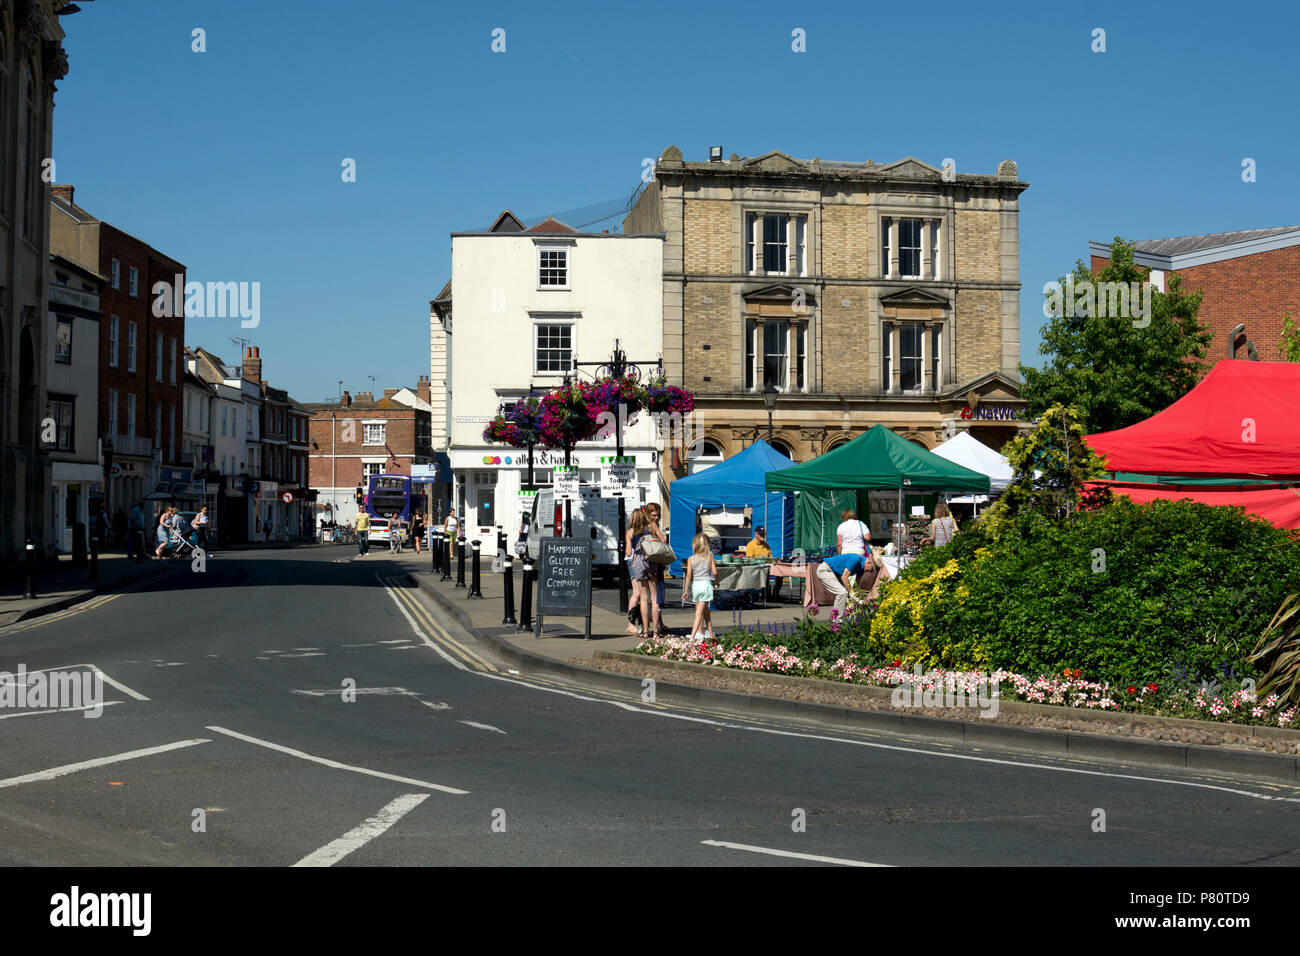 High Street and Town Square on market day, Abingdon, Oxfordshire, England, UK Stock Photo